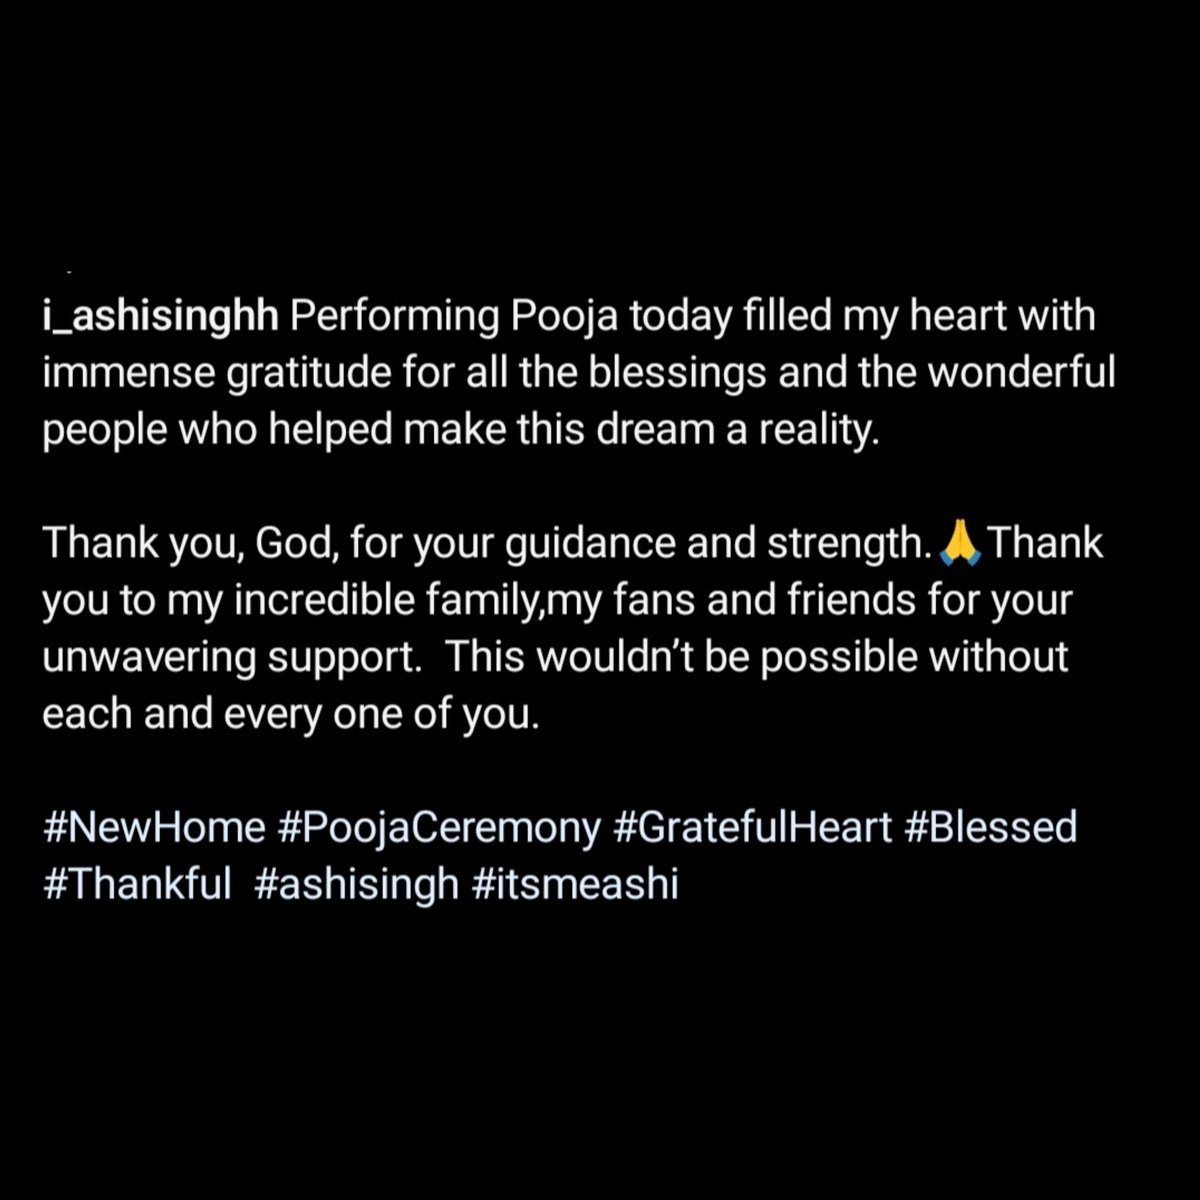 Her achievements feel so personal to me, probably because I've been following her since her very first show and have literally seen her start her acting career from scratch. I am so proud to see where you've reached, @Ashisinghh. Always wishing the best for you! ❤️💫 #AshiSingh